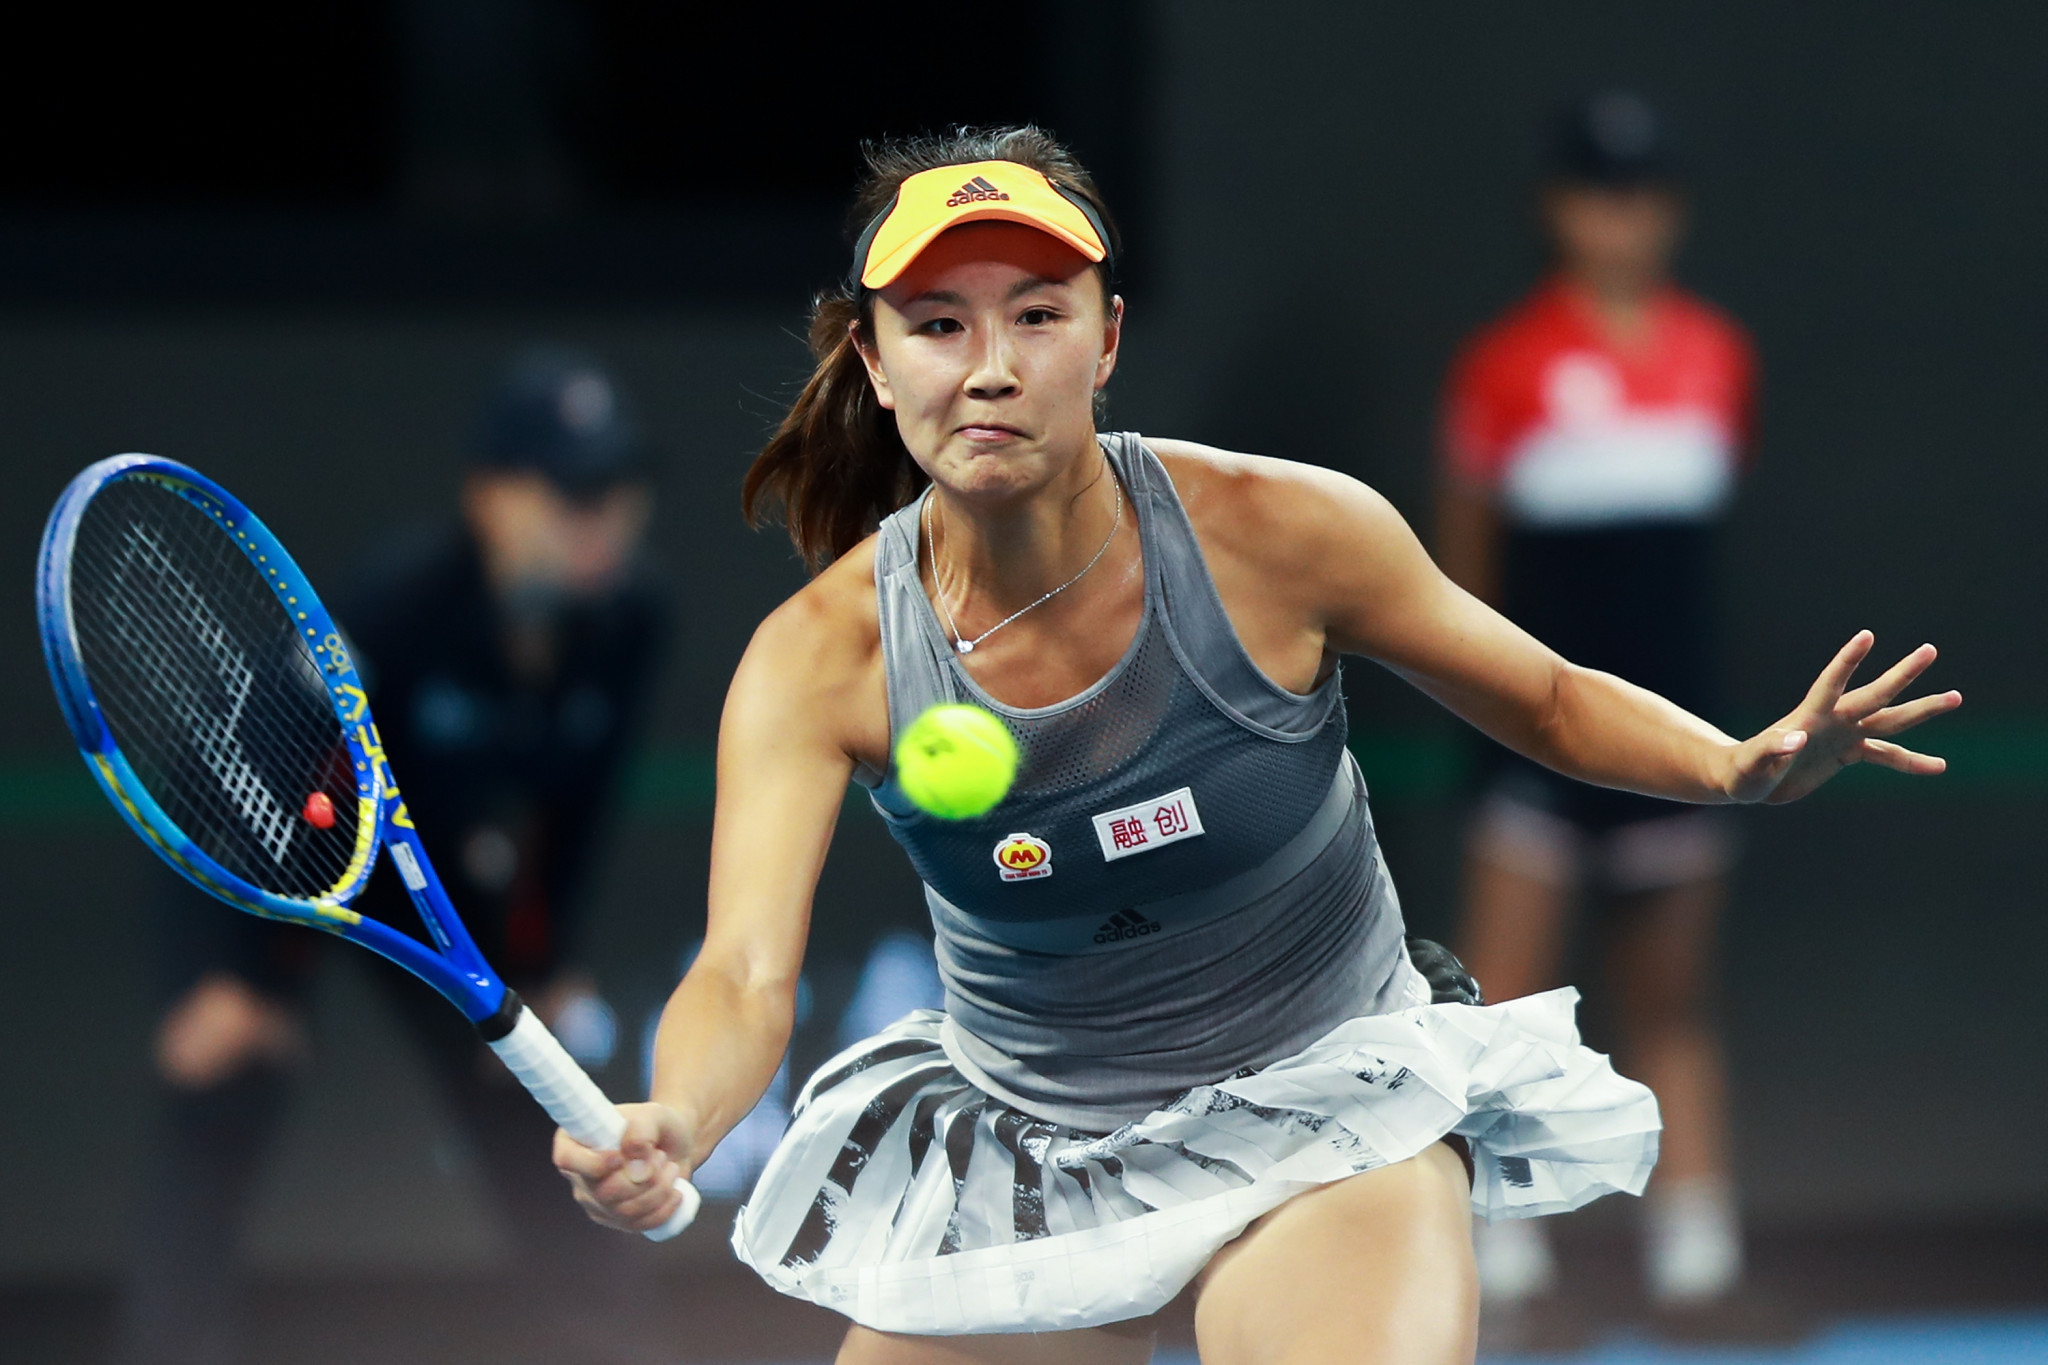 The Women's Tennis Association still has "significant concerns" over the welfare of Peng Shuai ©Getty Images